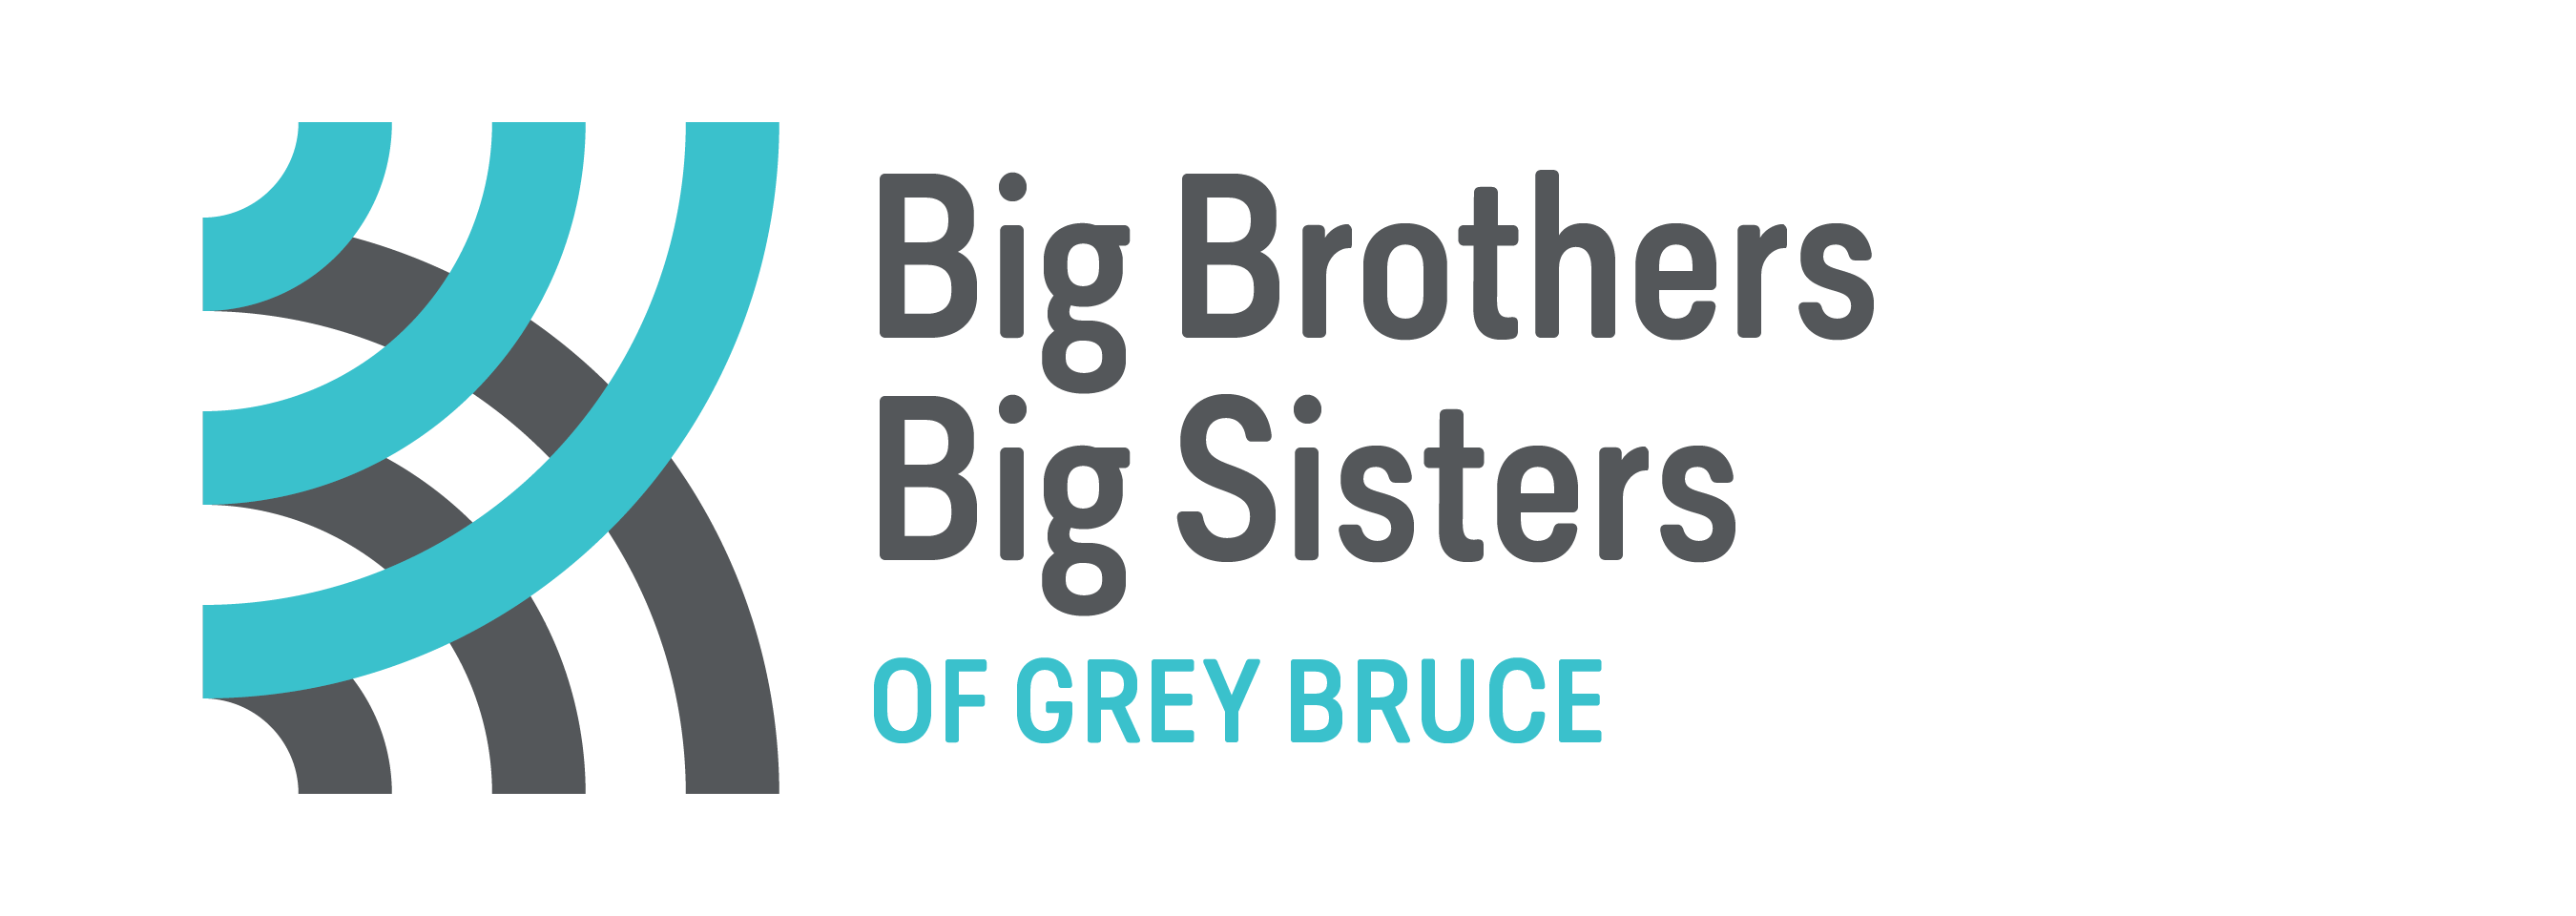 Logo for Big Brothers Big Sisters of Grey Bruce